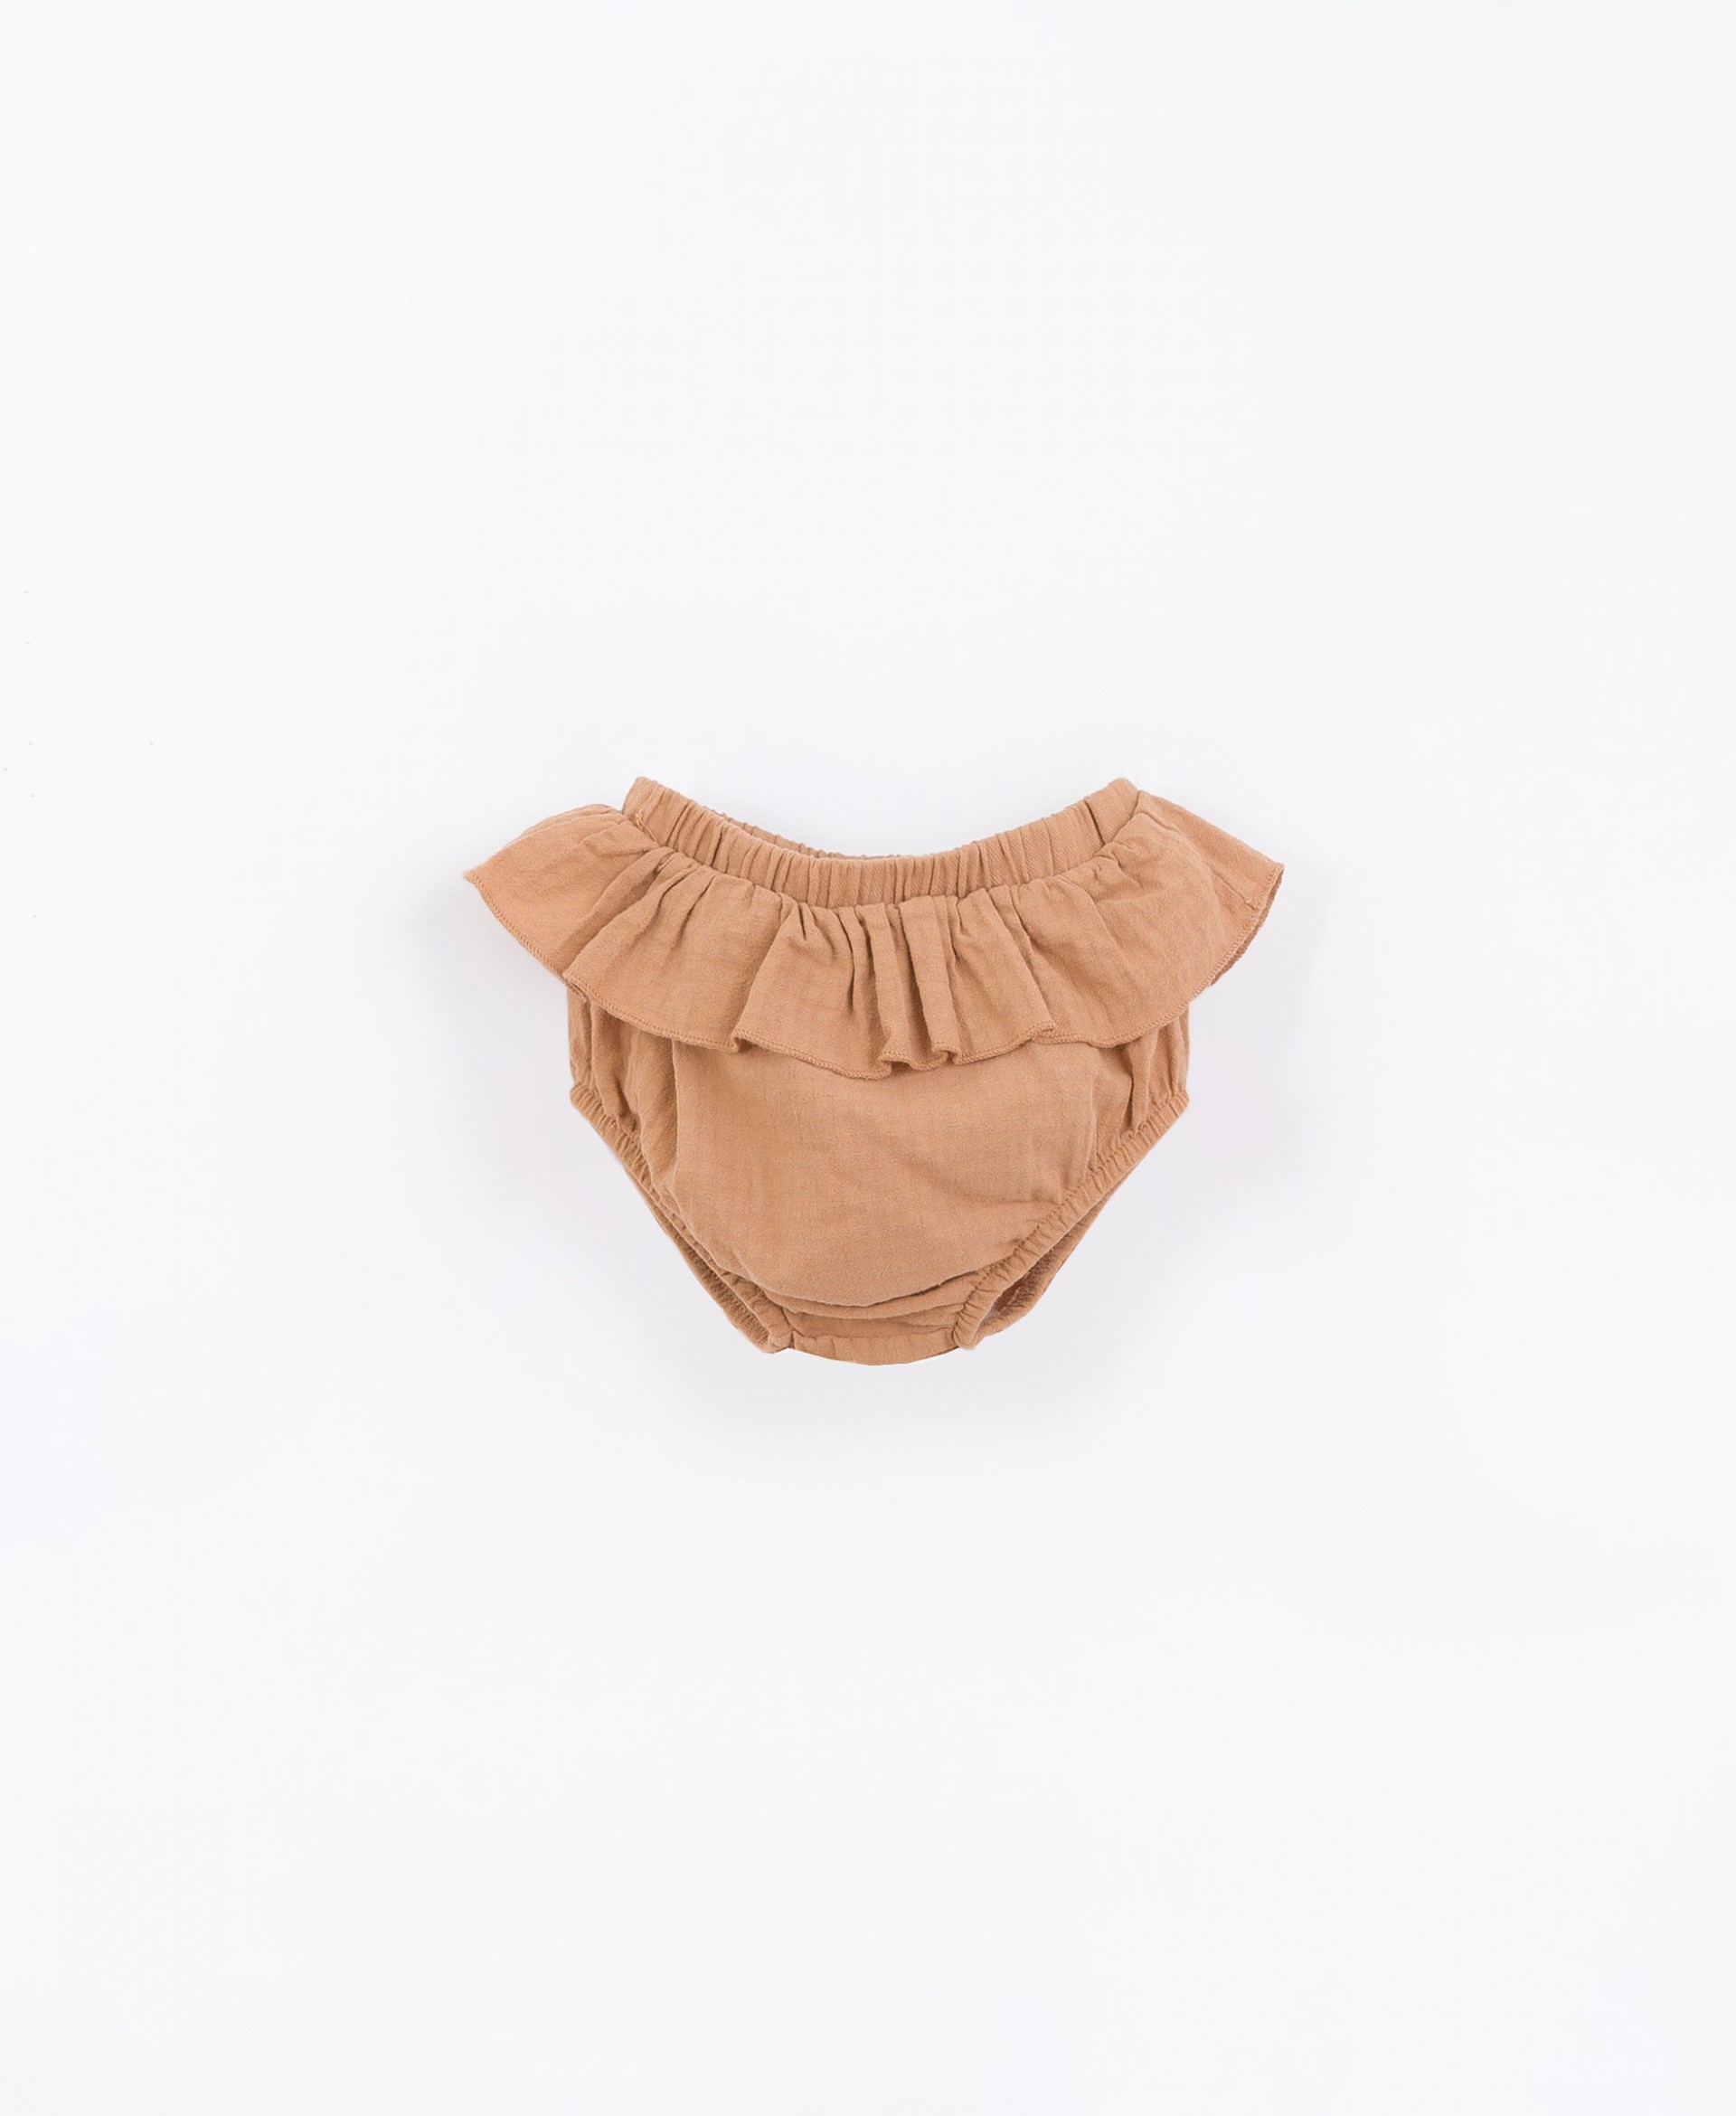 Ruffled cotton underpants | Basketry